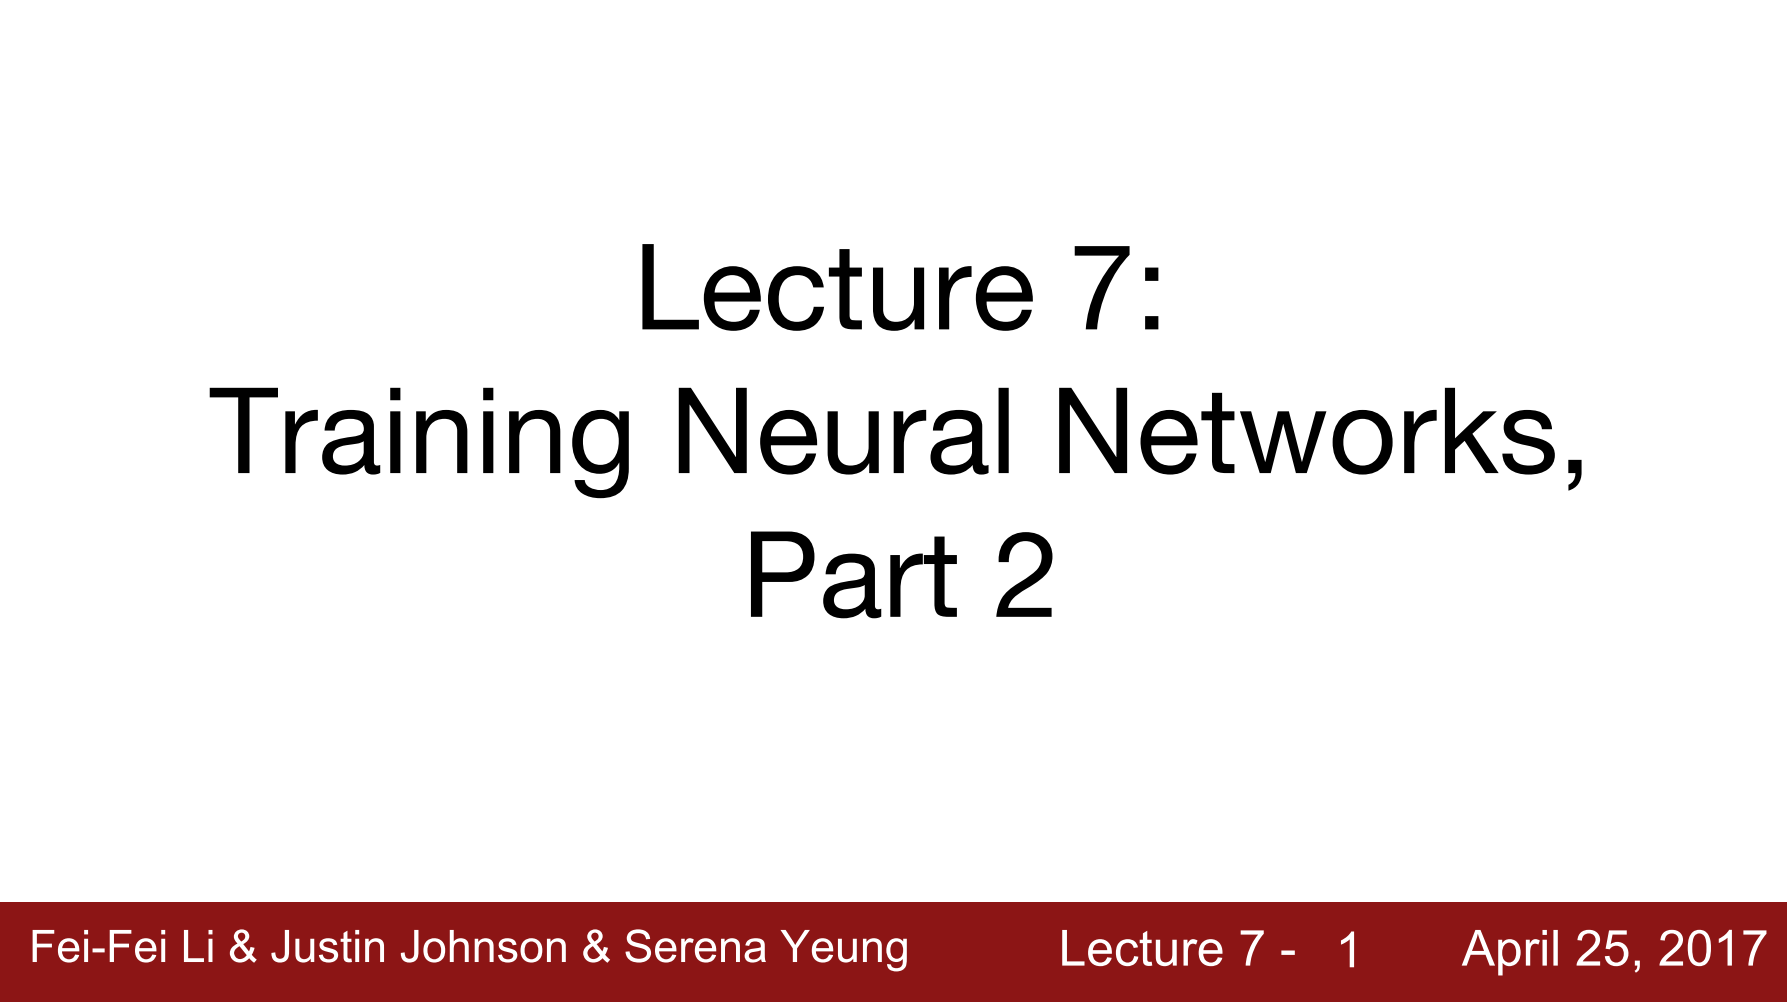 7. Training Neural Networks 2